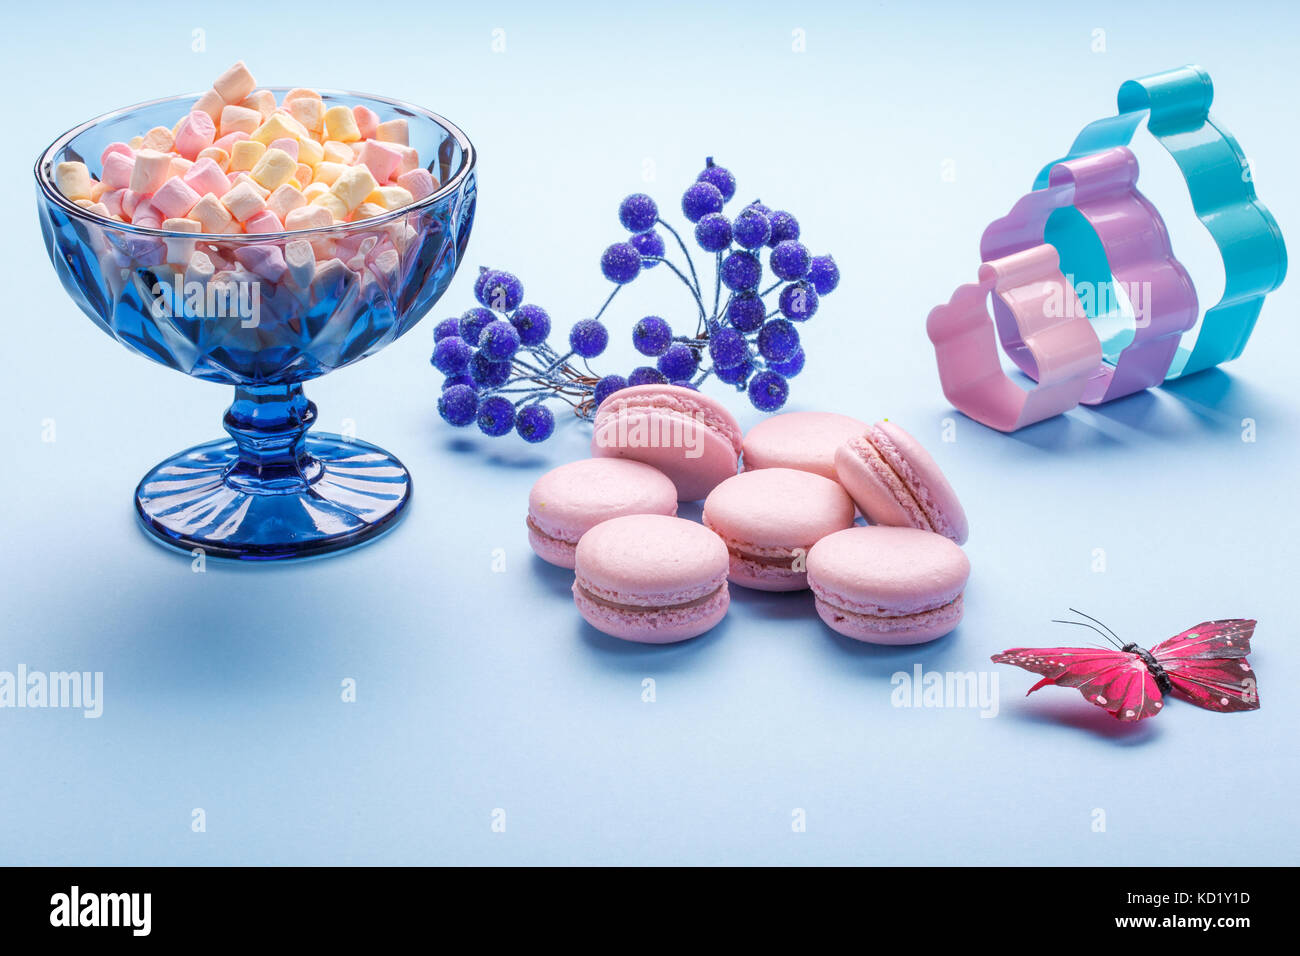 Macaroon cakes with colorful fluffy marshmallows in blue vase over blue background. Stock Photo